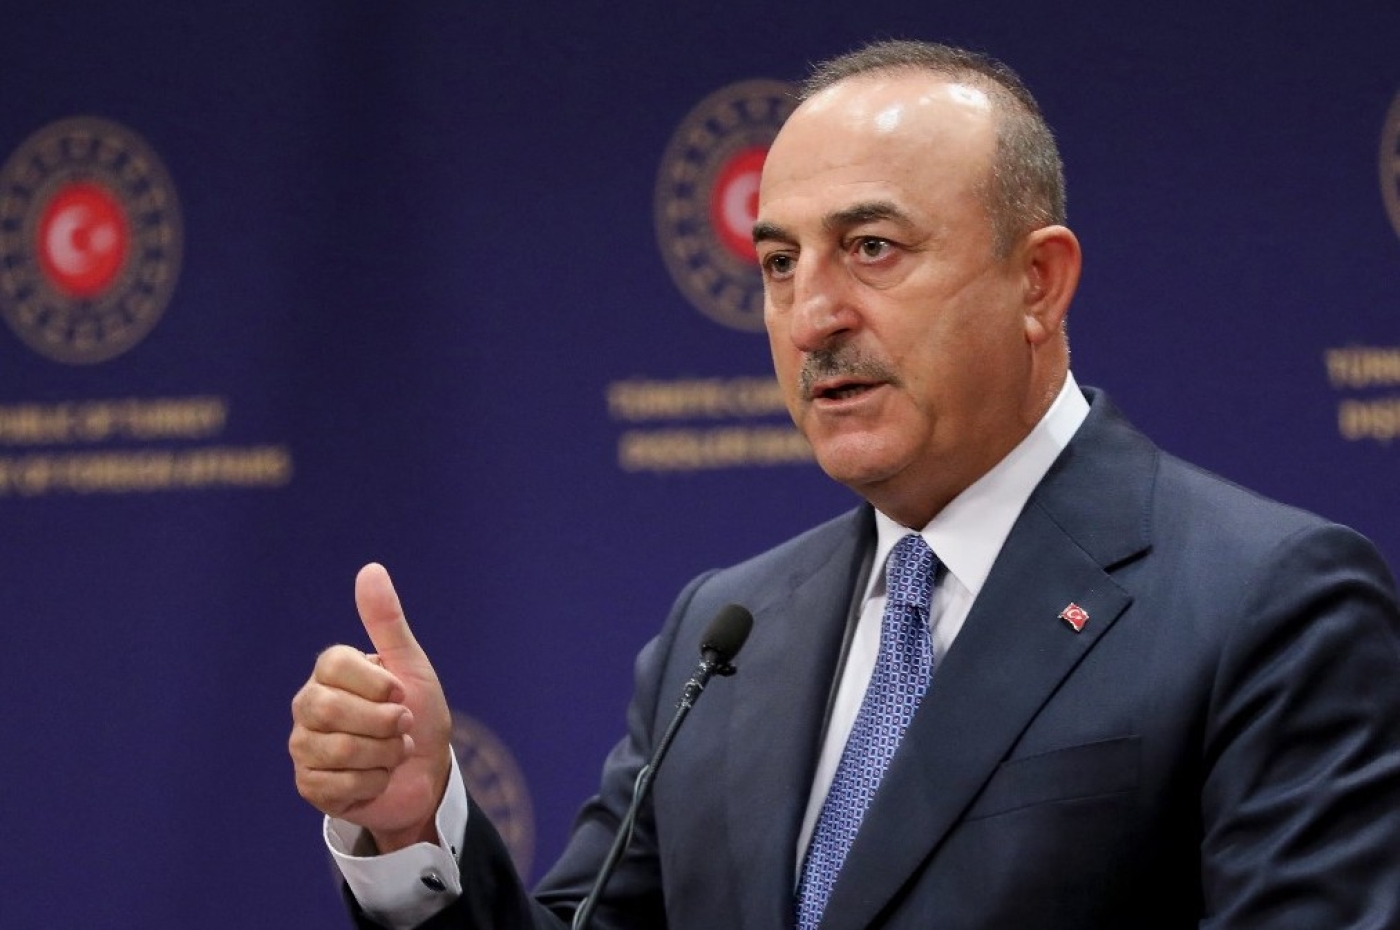 Turkish Foreign Minister Mevlut Cavusoglu said Ankara could appoint an ambassador to Egypt if the meeting between the two countries goes well